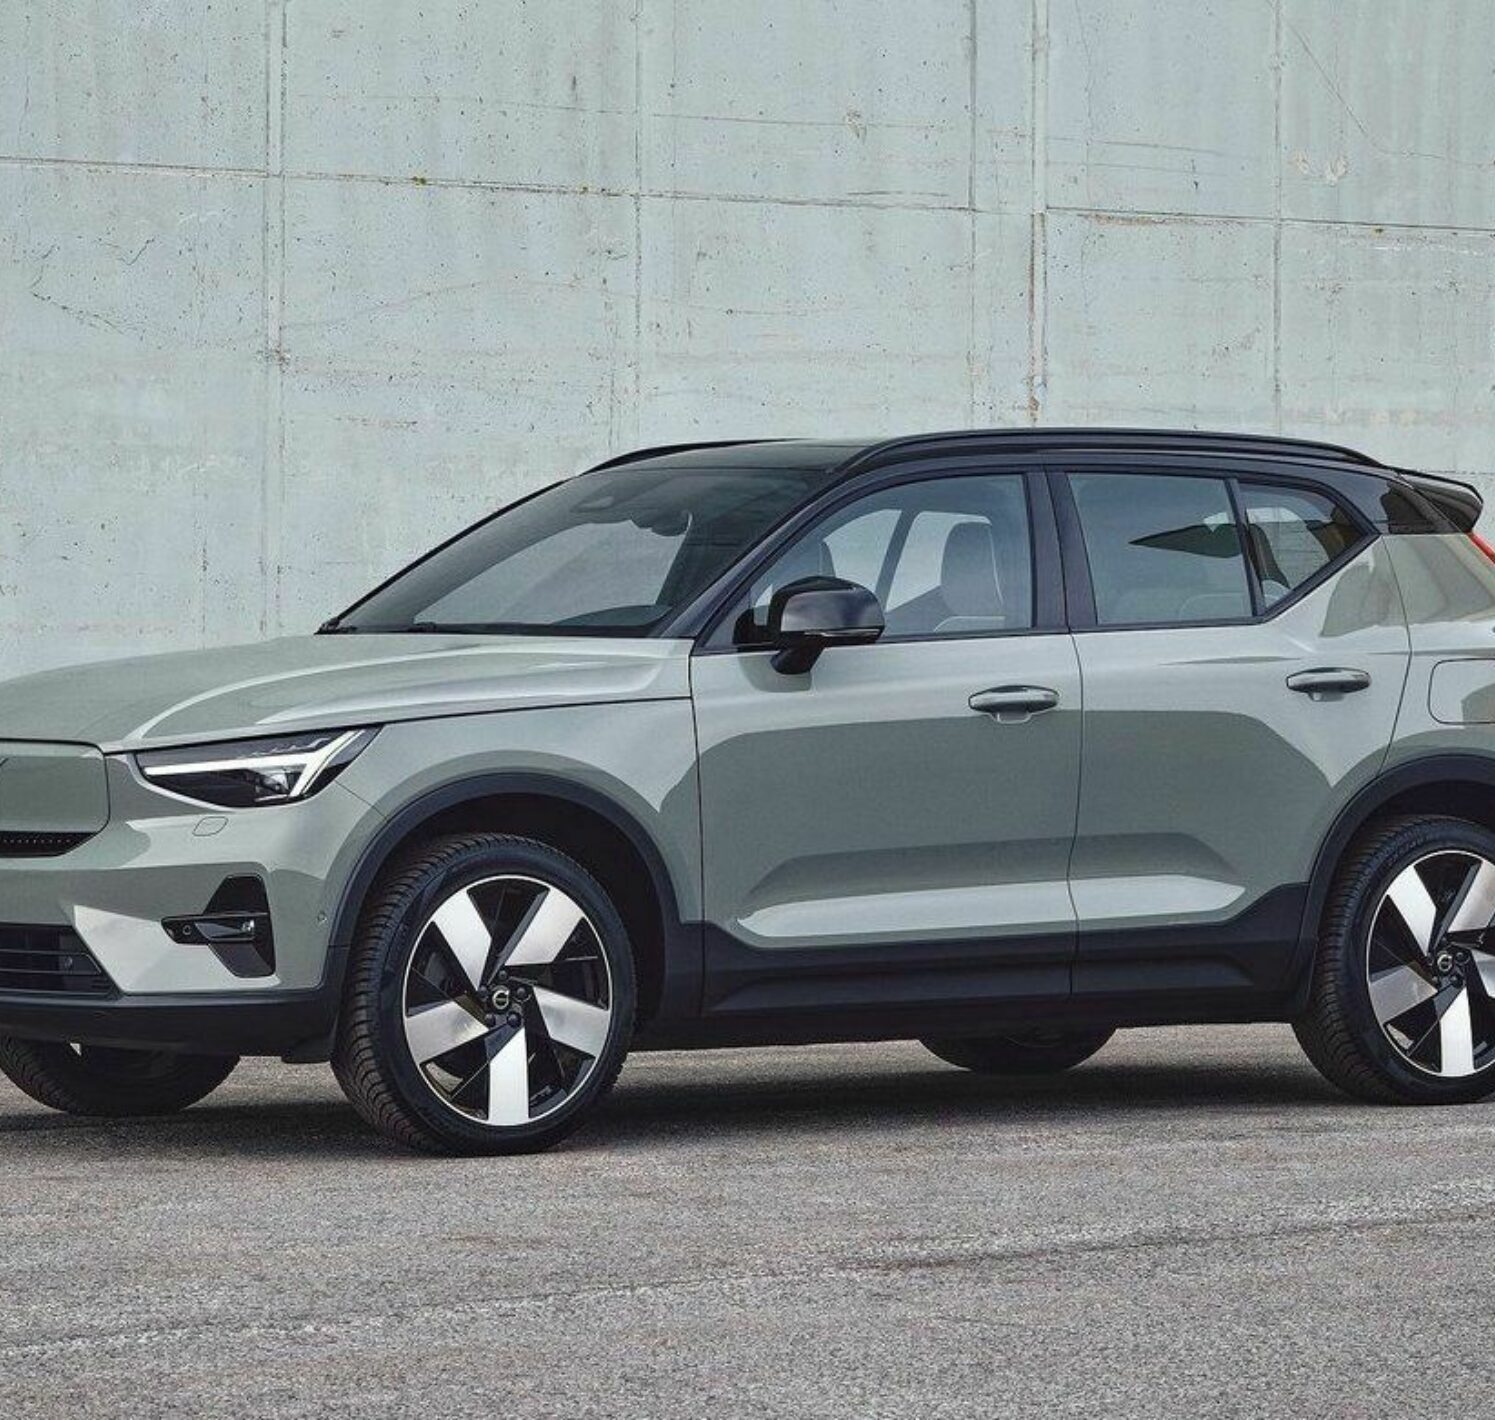 https://autofilter.sk/assets/images/xc40-recharge/gallery/volvo-xc40-recharge-2022_11-galeria.jpg - obrazok